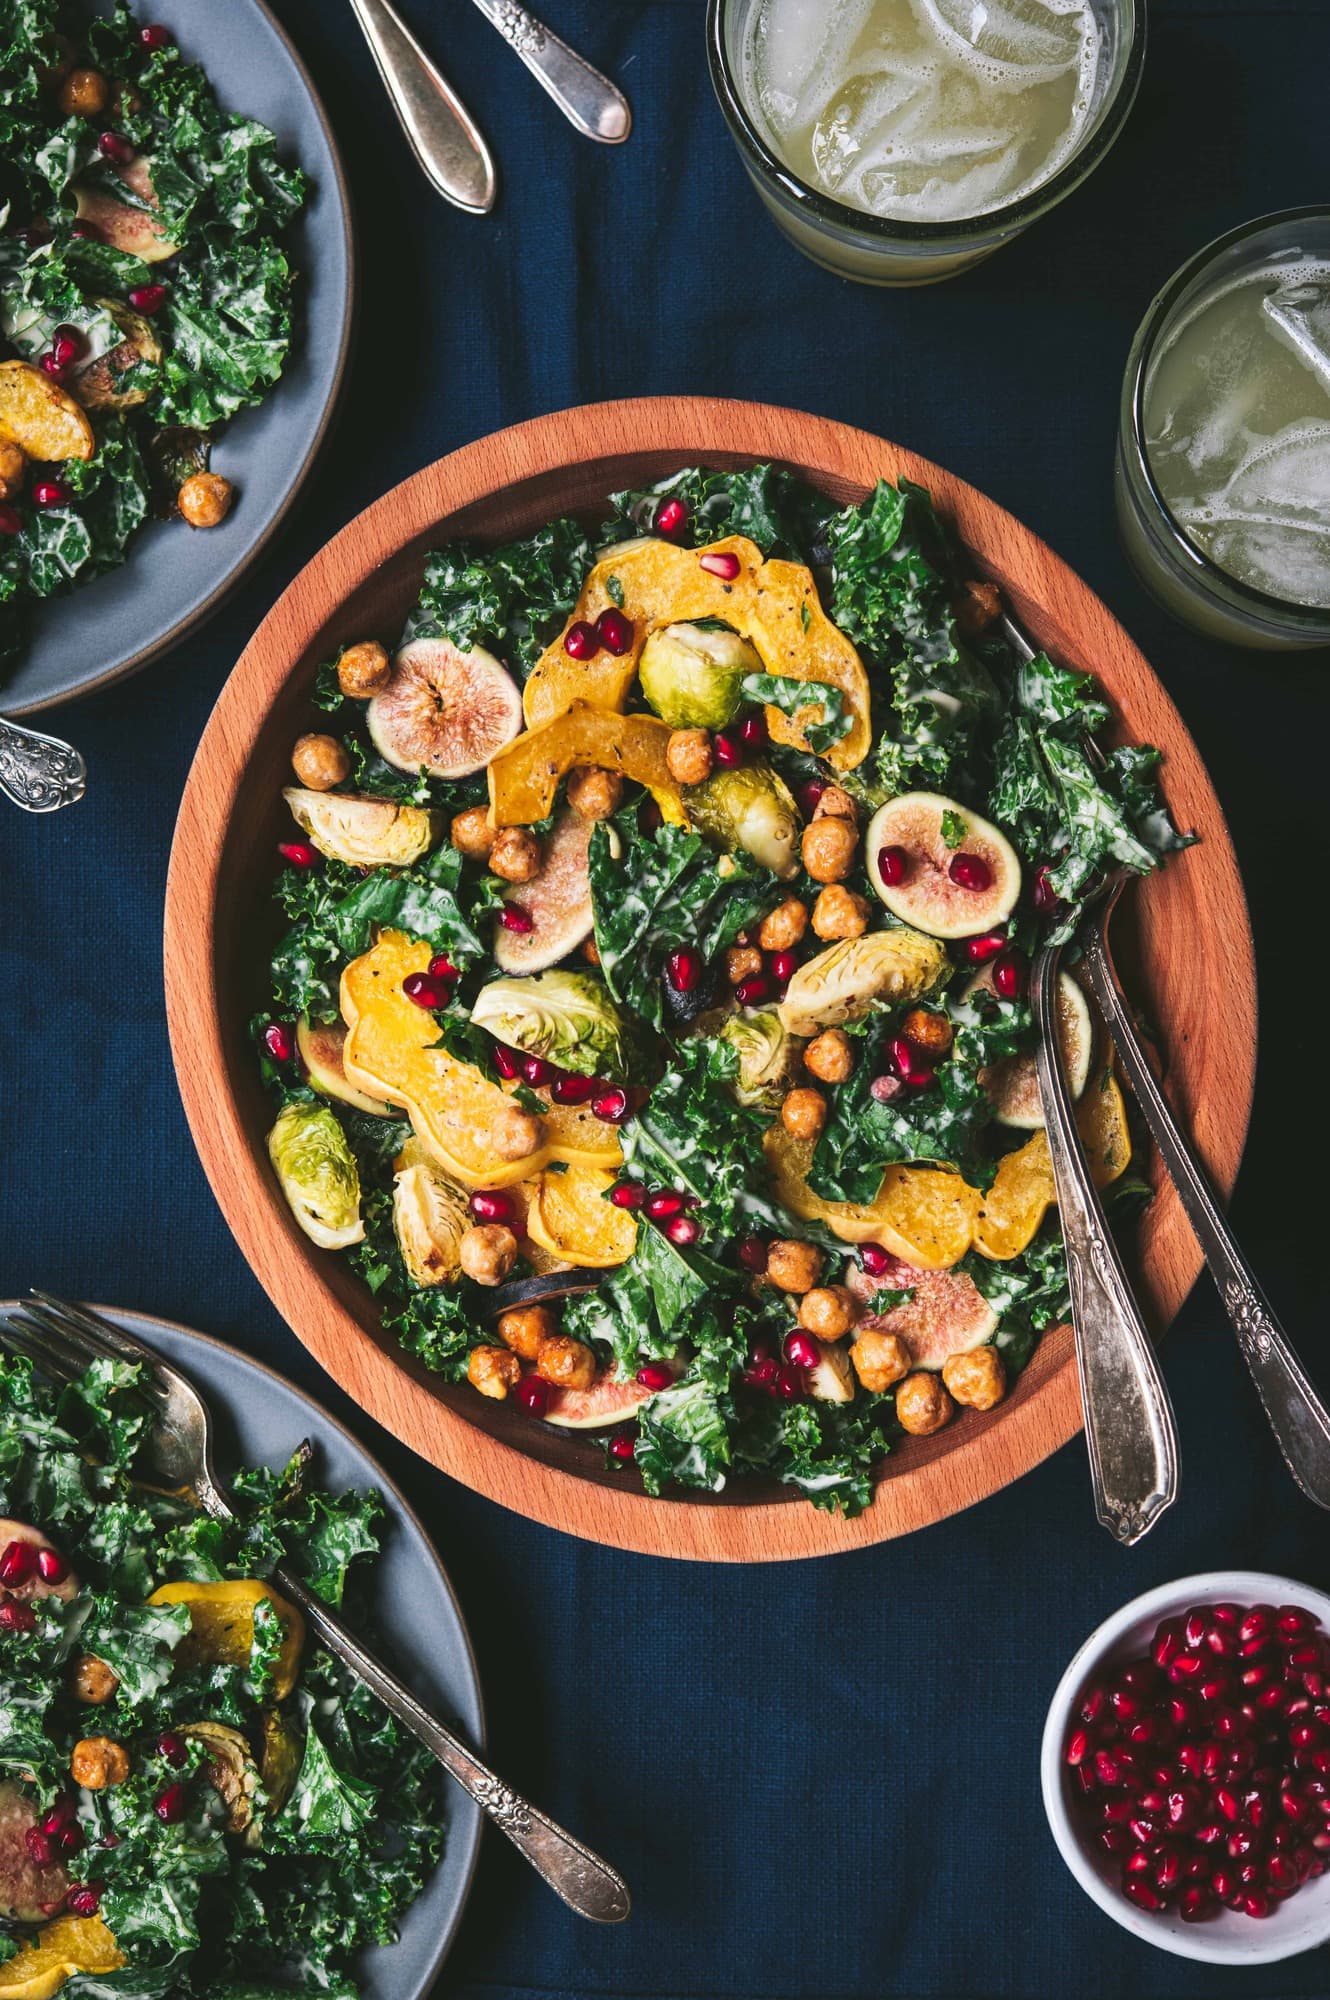 Large bowl of kale salad with fall roasted vegetables, tahini dressing and a bowl of pomegranate seeds